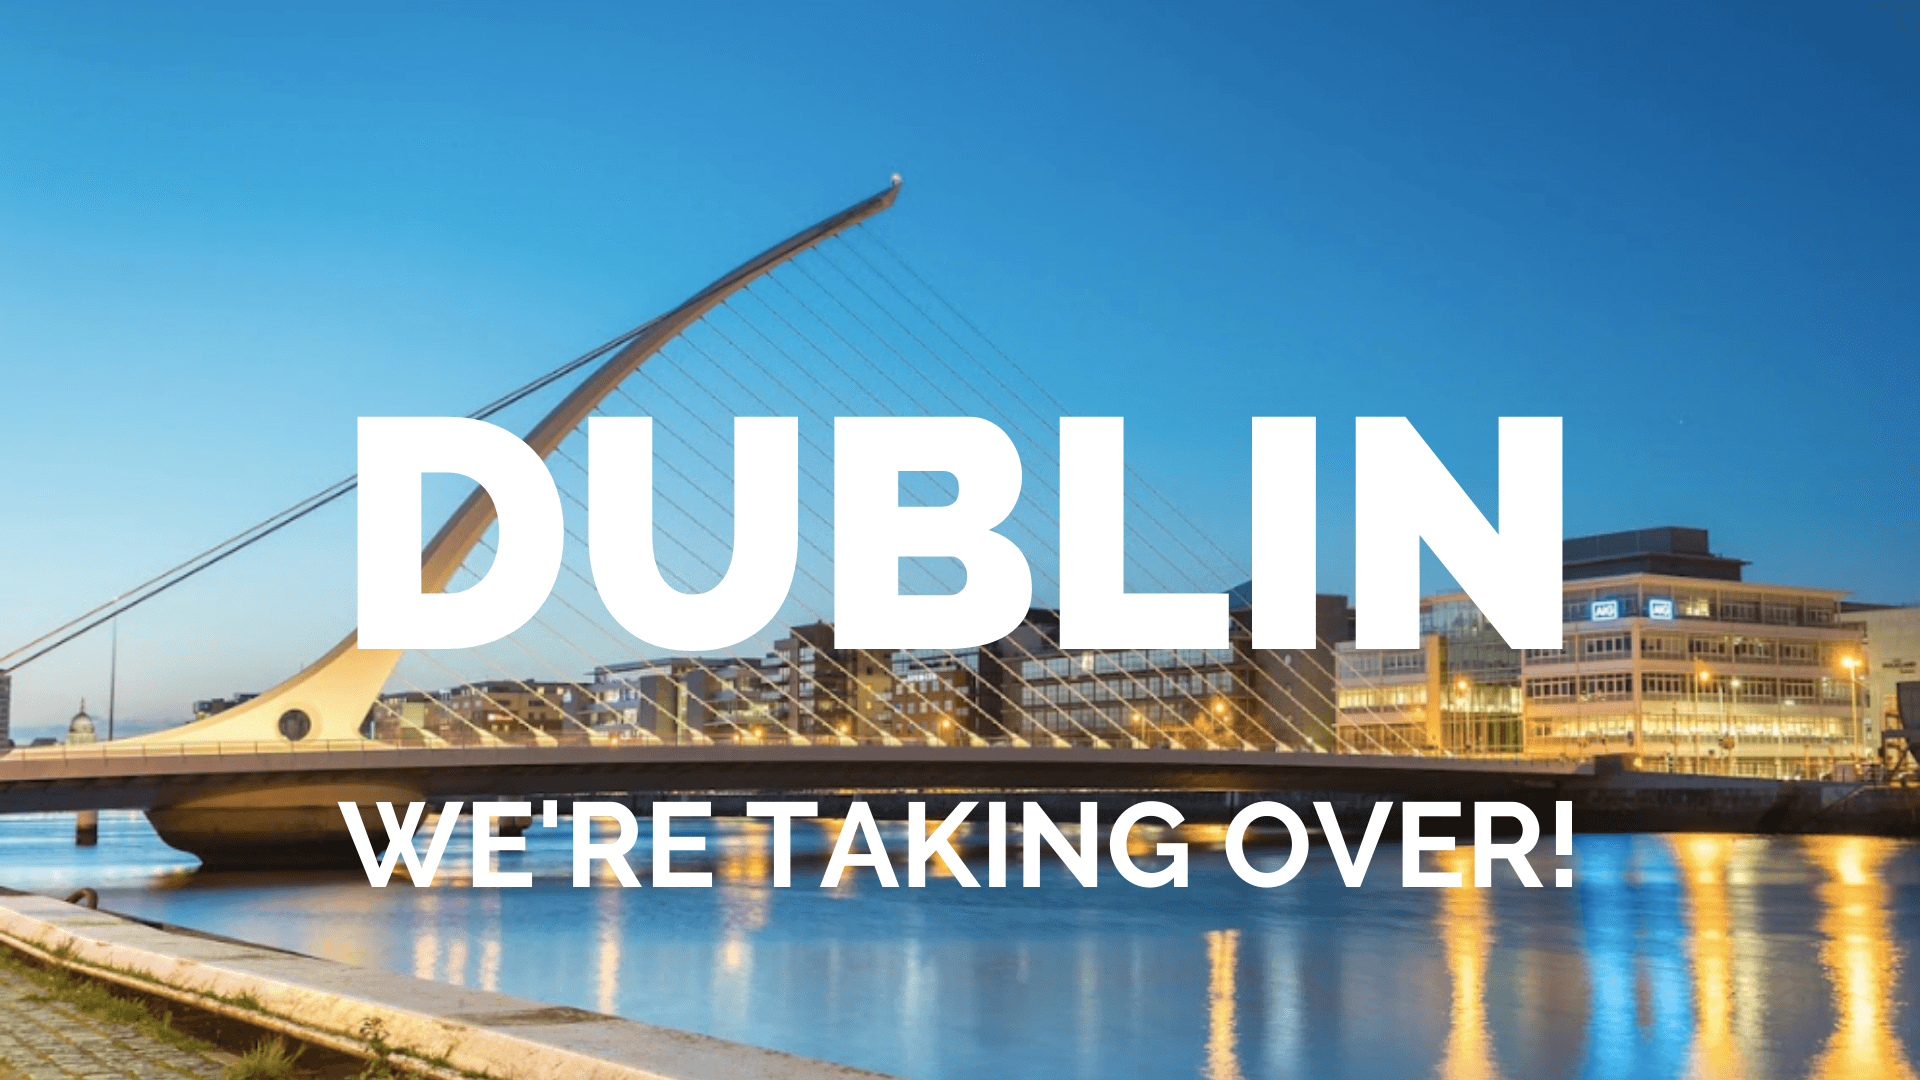 Dublin is about to get 2 new landmarks... - Gym+Coffee